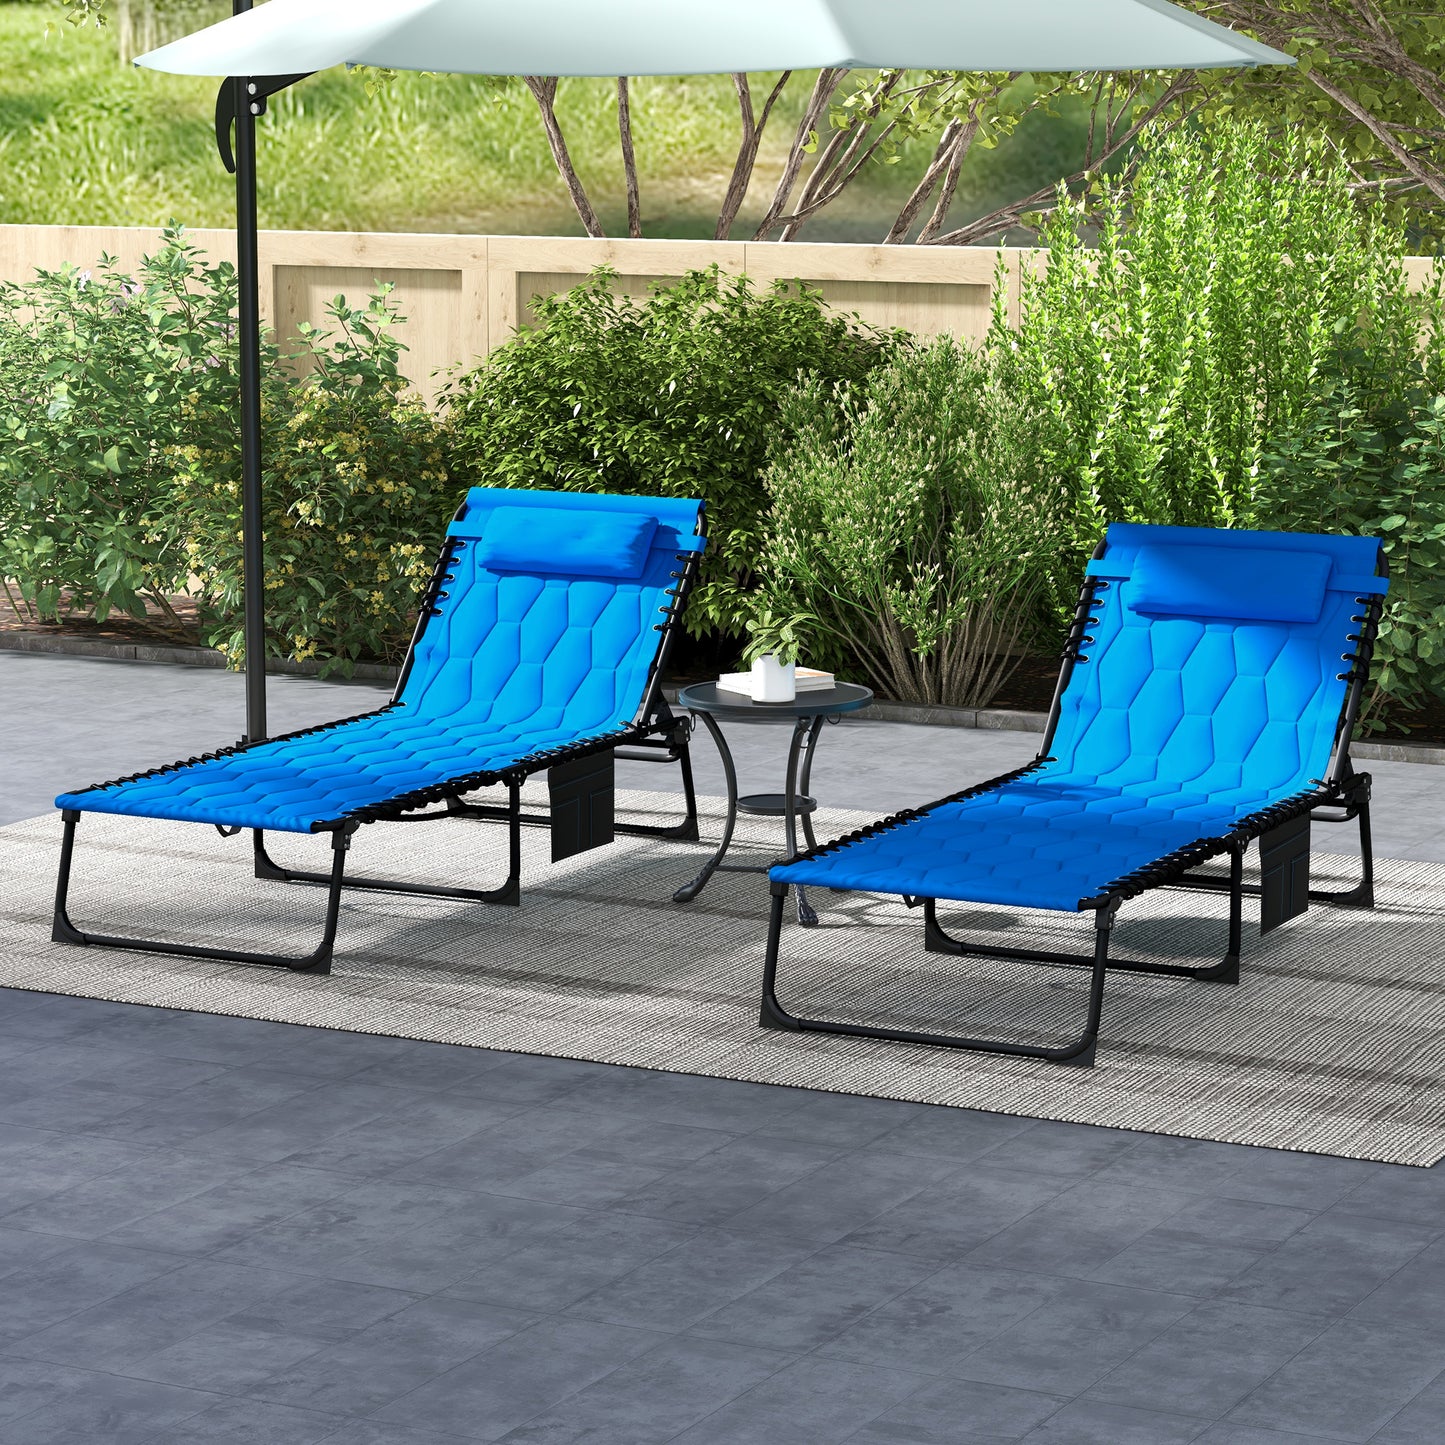 Outsunny Set of 2 Garden Chair Recliners, Double Sun Loungers with Foam Cushion, Five-Position Reclining Backs & Metal Frame for Garden Patio, Blue | Aosom UK